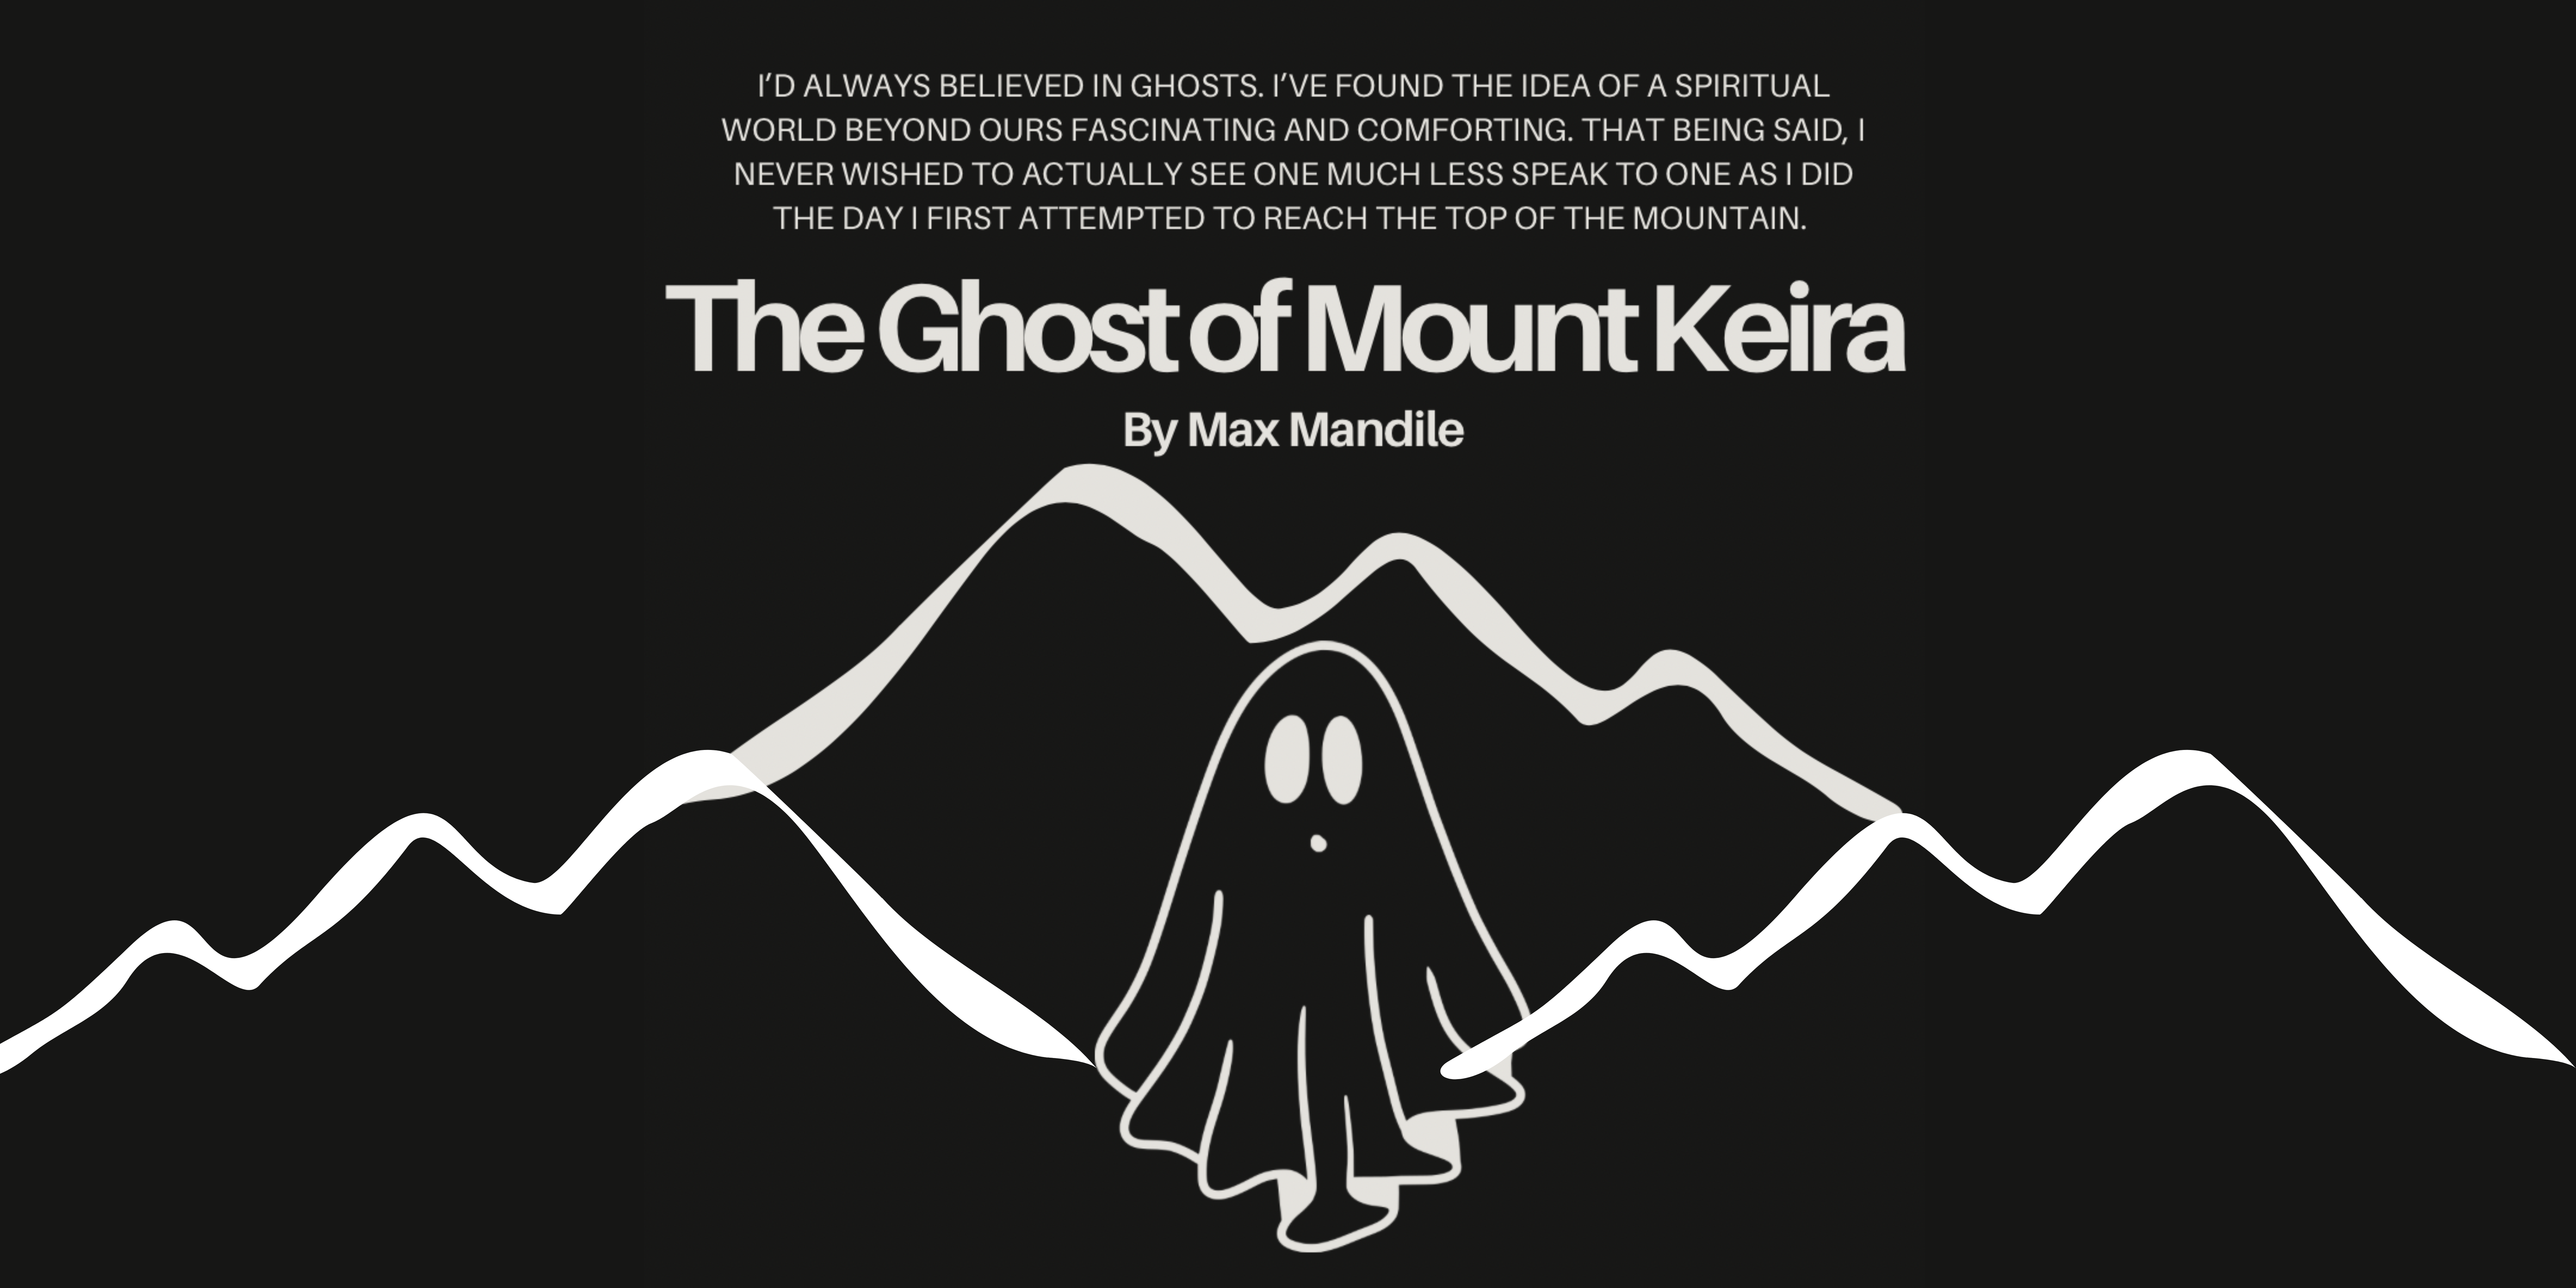 The Ghost of Mount Keira